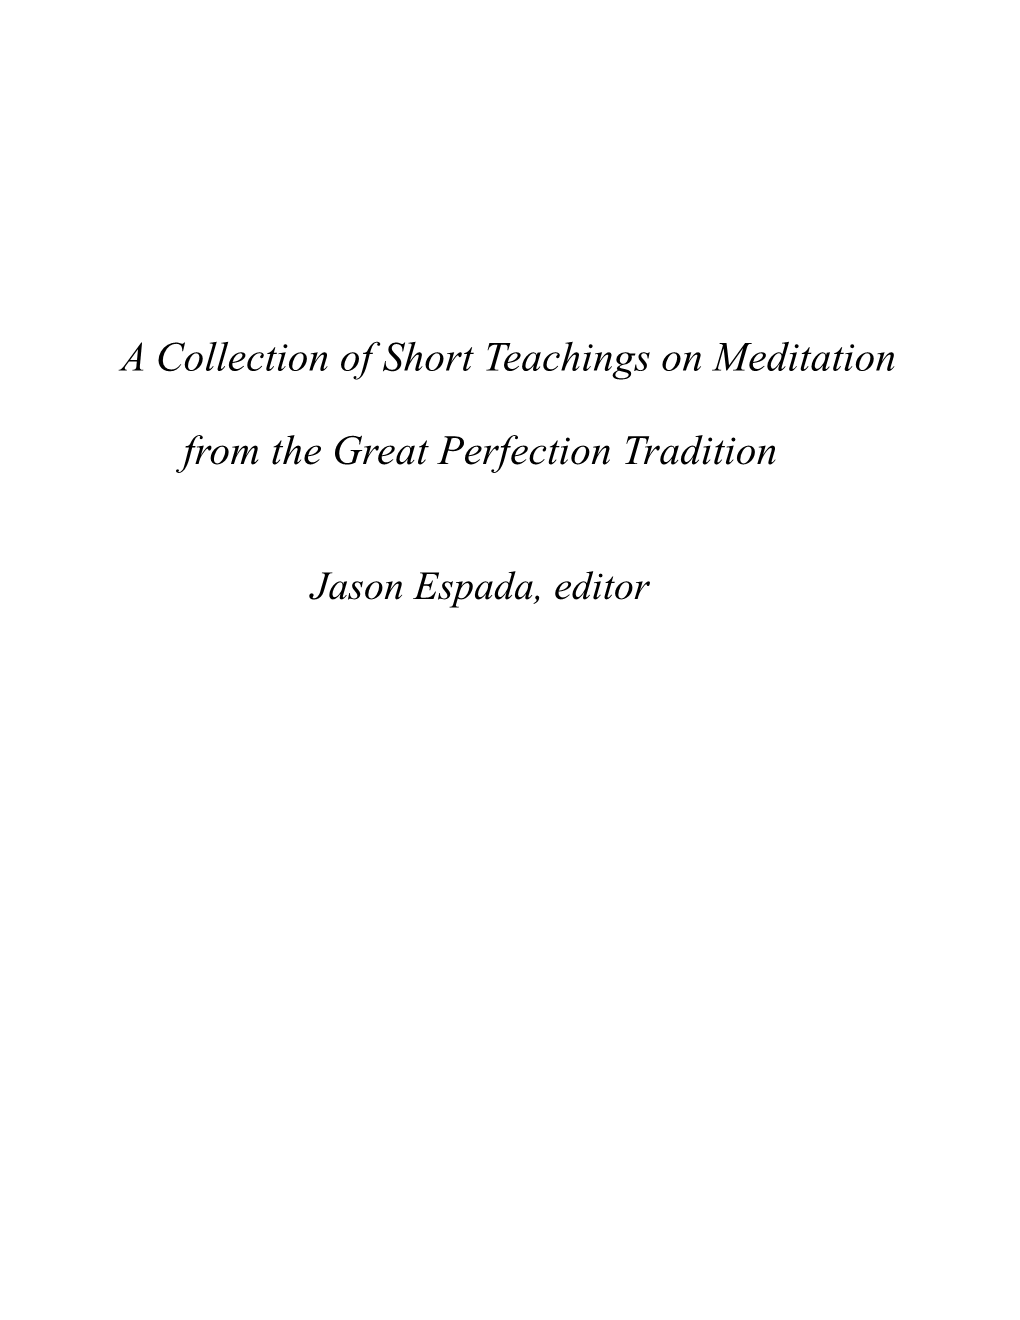 A Collection of Short Teachings on Meditation from the Great Perfection Tradition